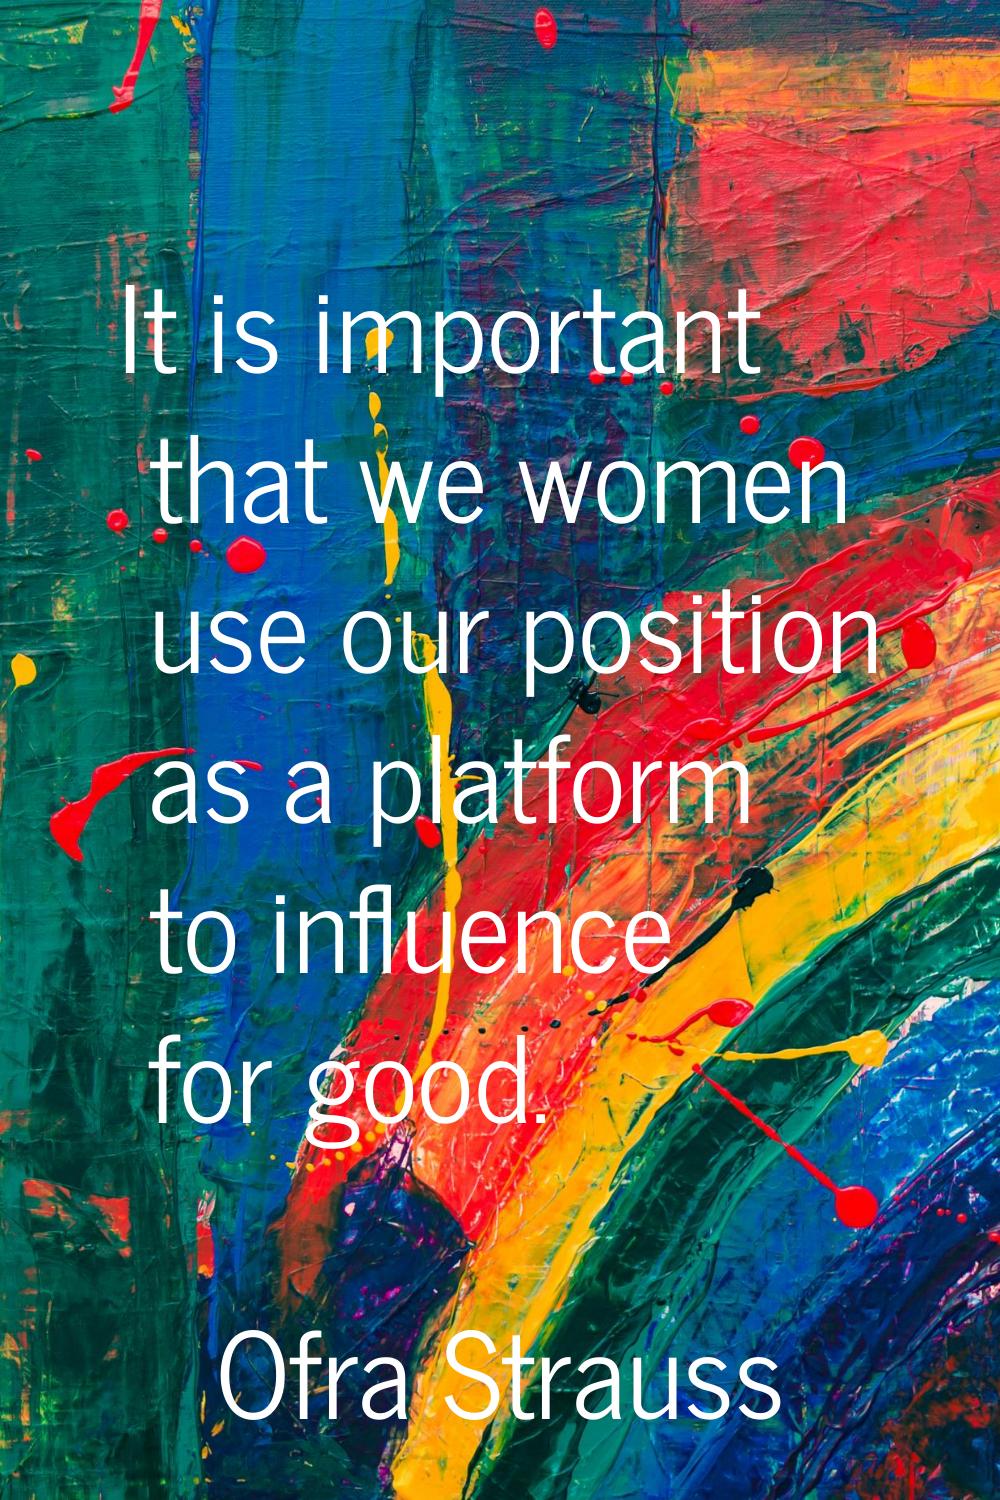 It is important that we women use our position as a platform to influence for good.